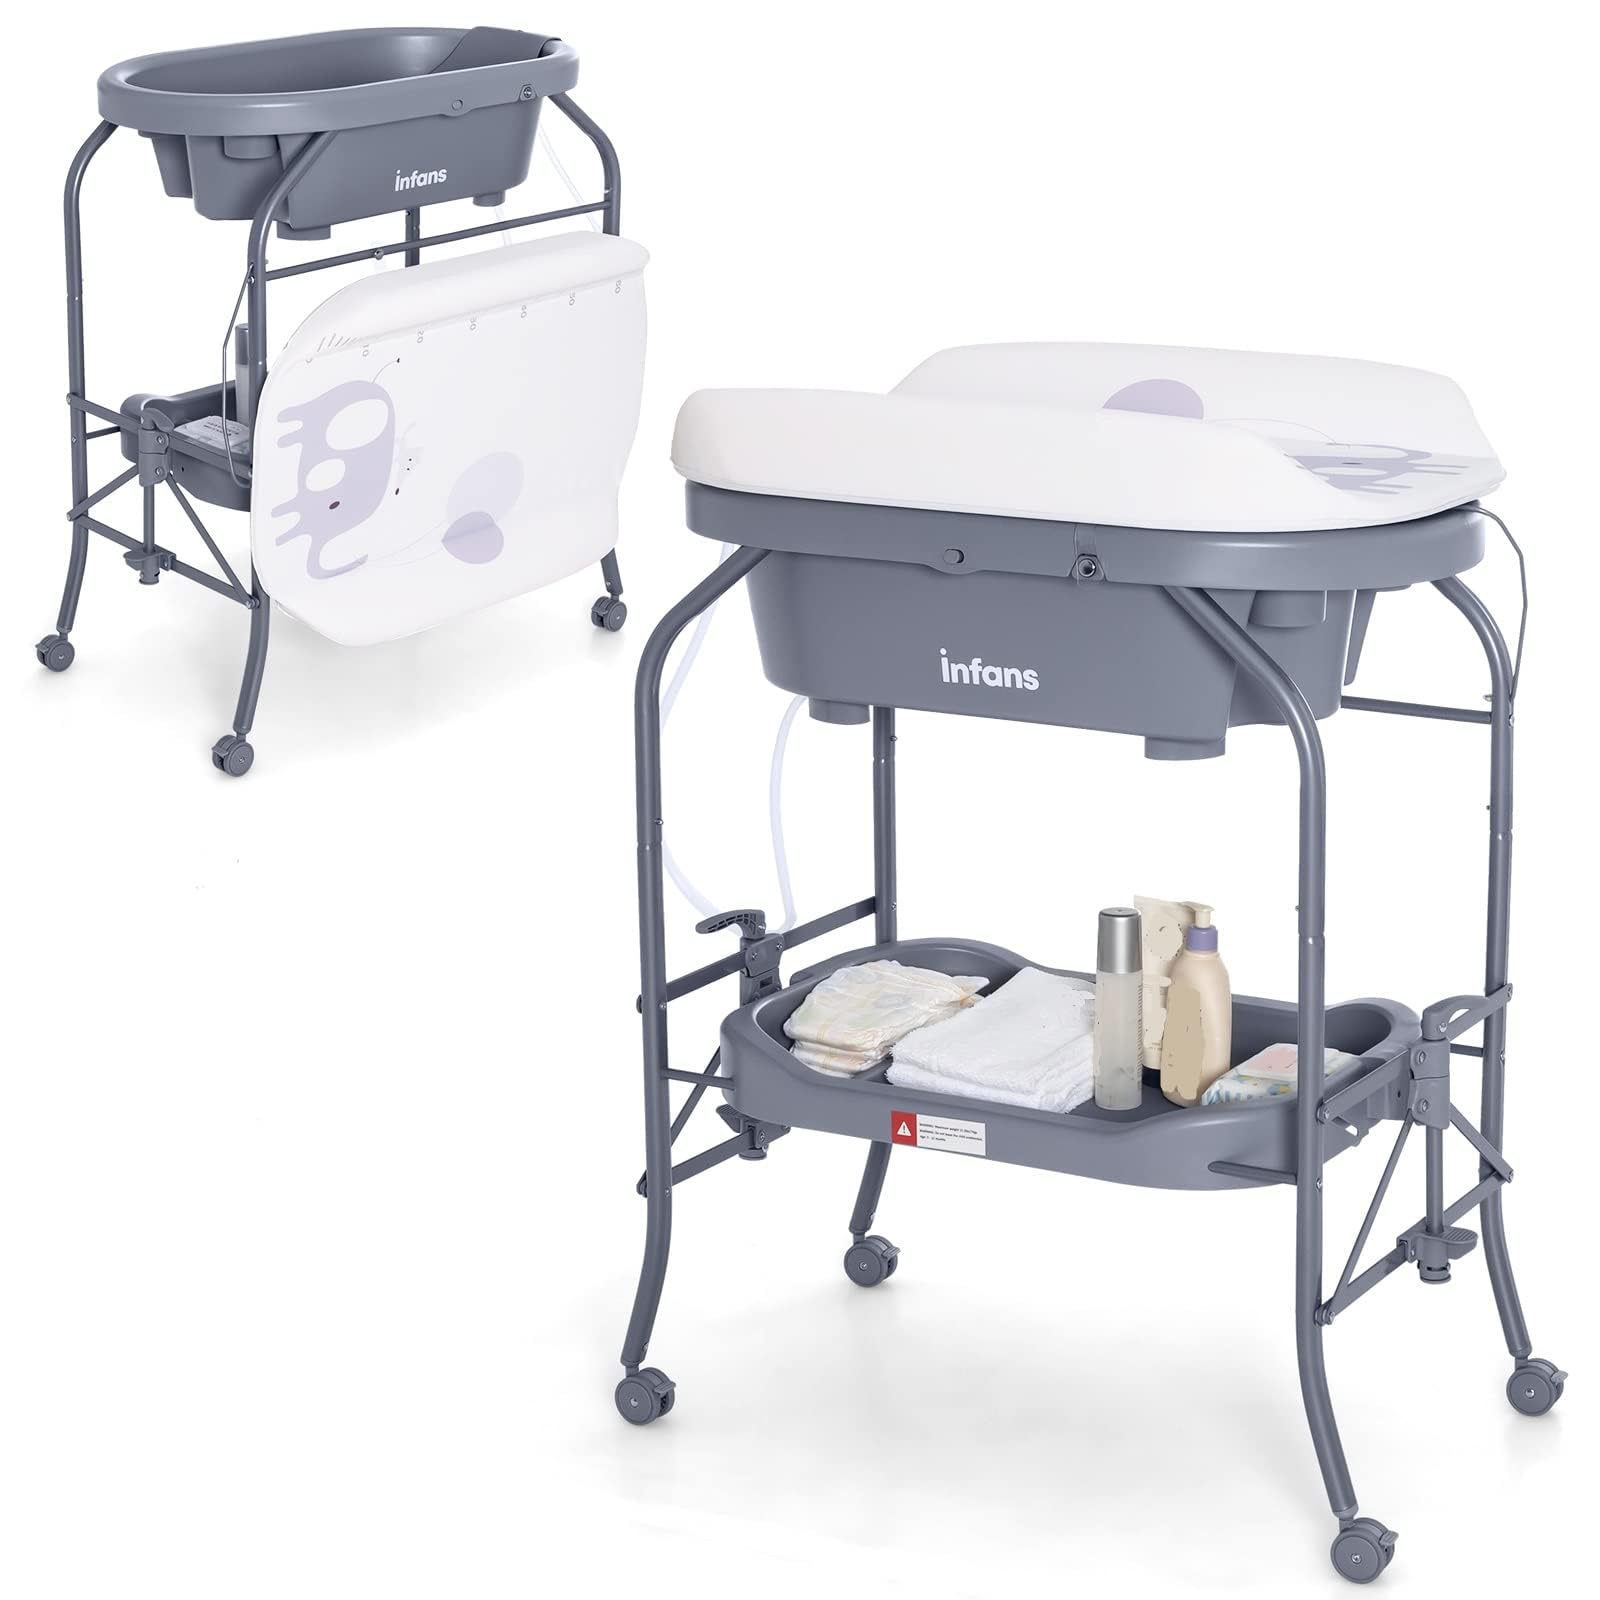 INFANS 2 in 1 Baby Changing Table with Bath Tub Unit, Folding Diaper D